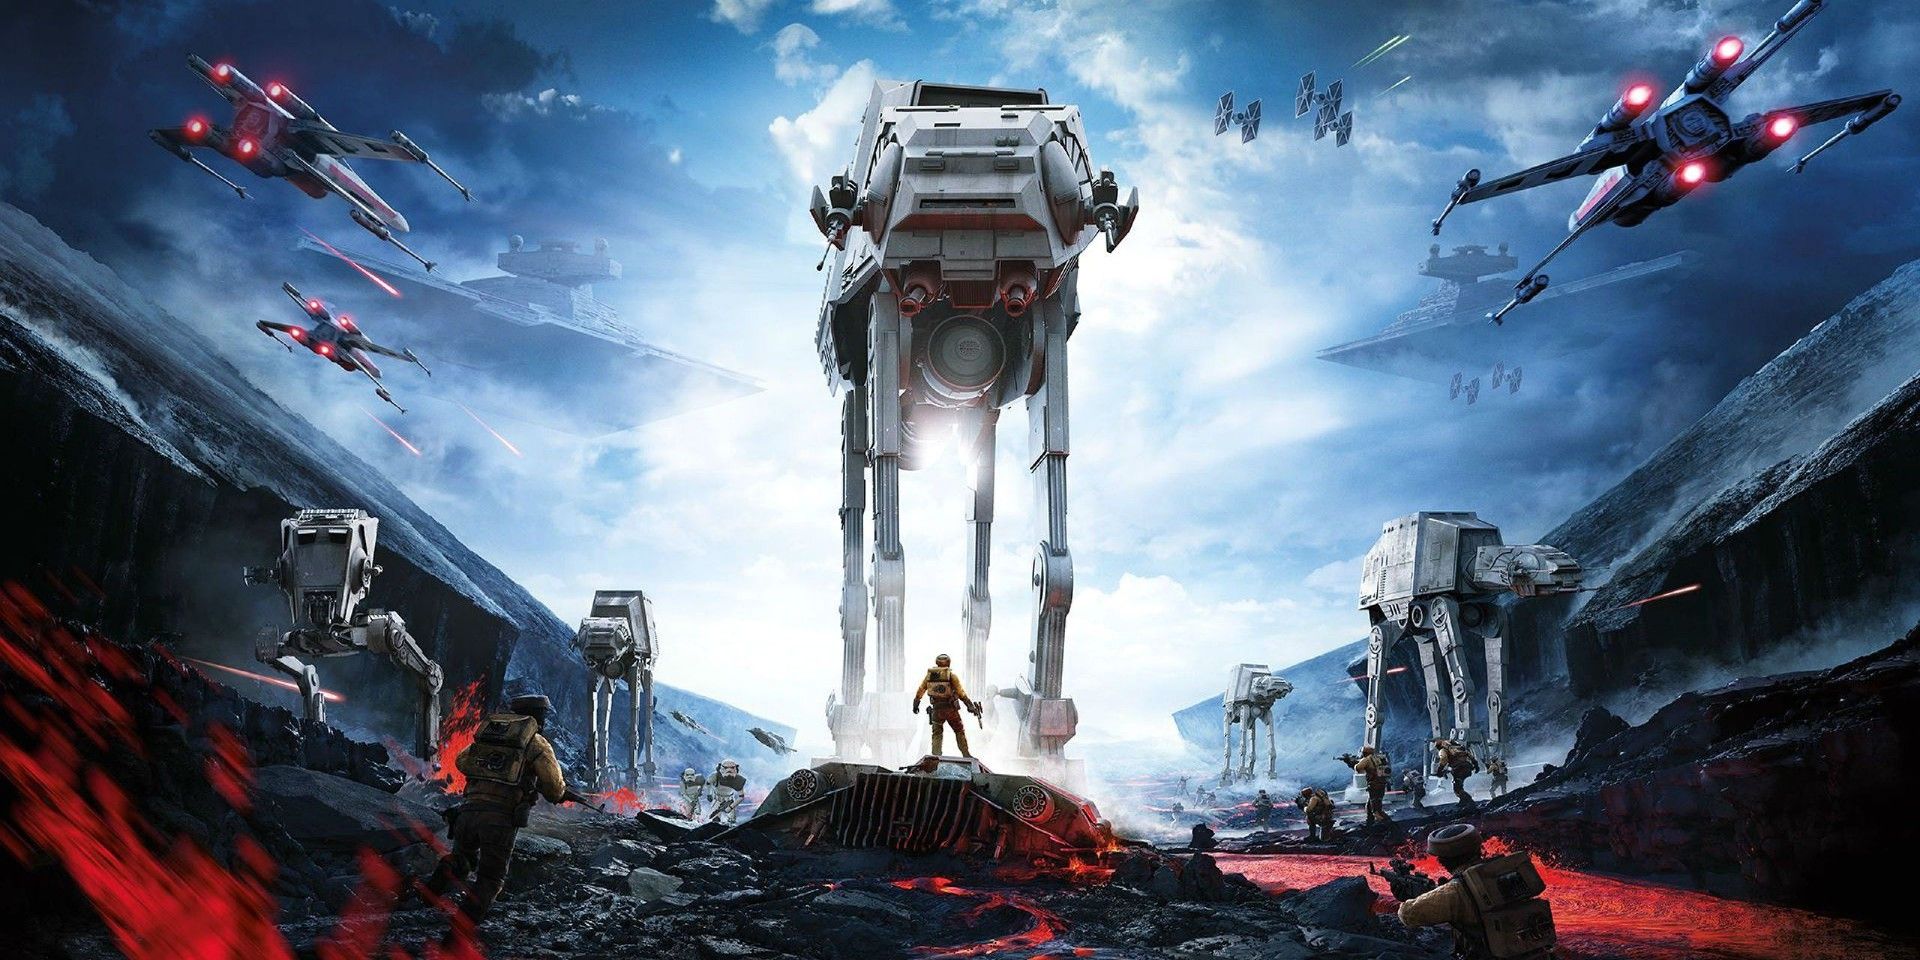 The Front Cover of Battlefront with AT-AT's, X-Wings and Rebel Soldiers Star Wars